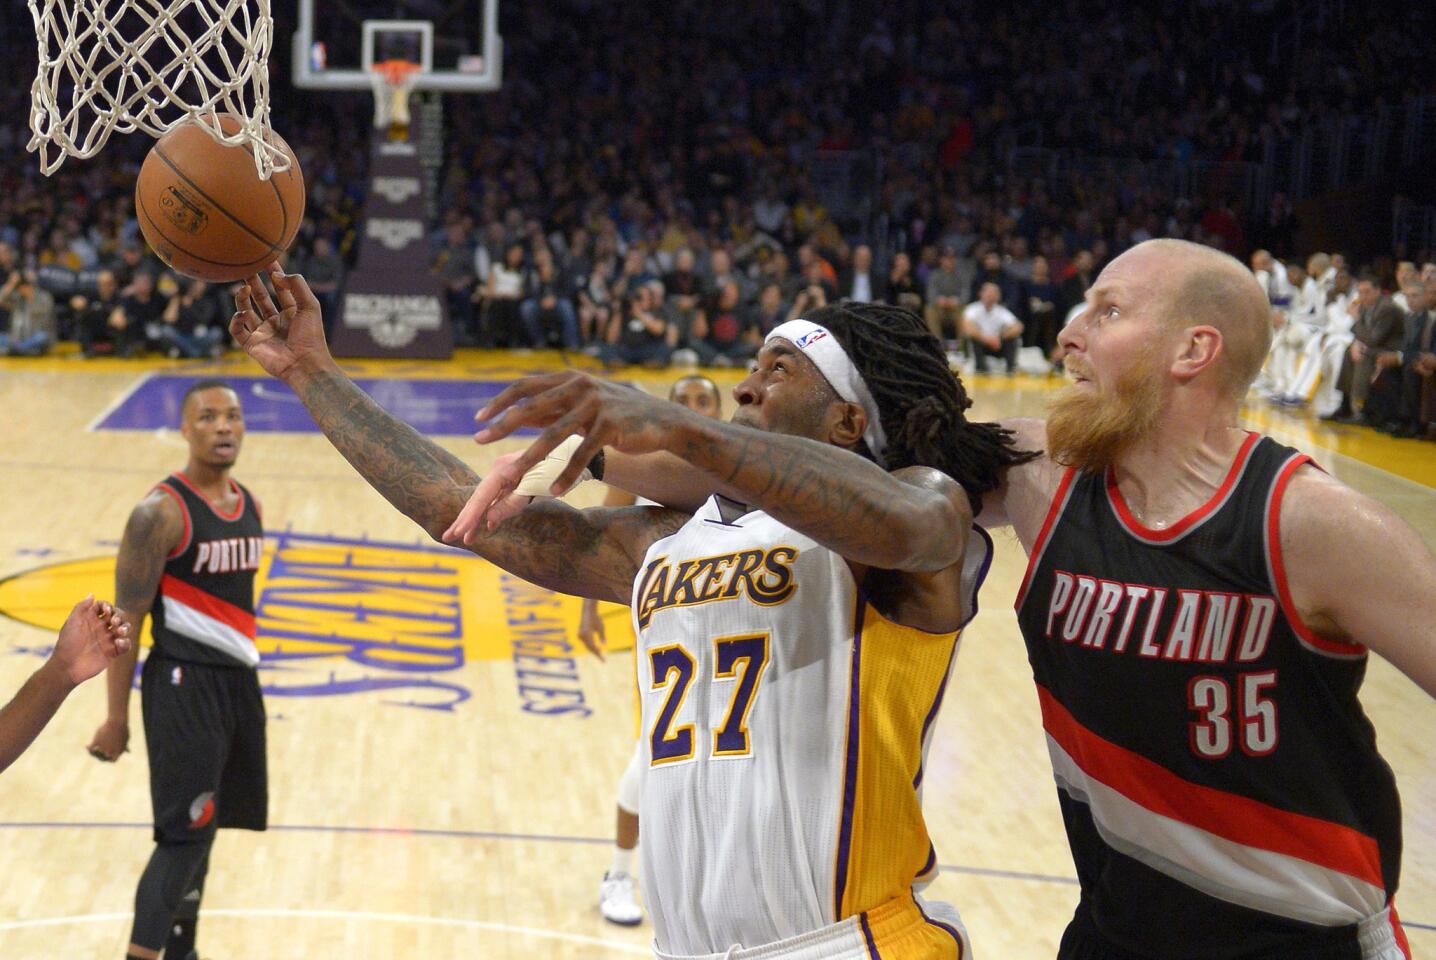 Lakers center Jordan Hill is fouled by Trail Blazers center Chris Kaman on a layup in the second half.